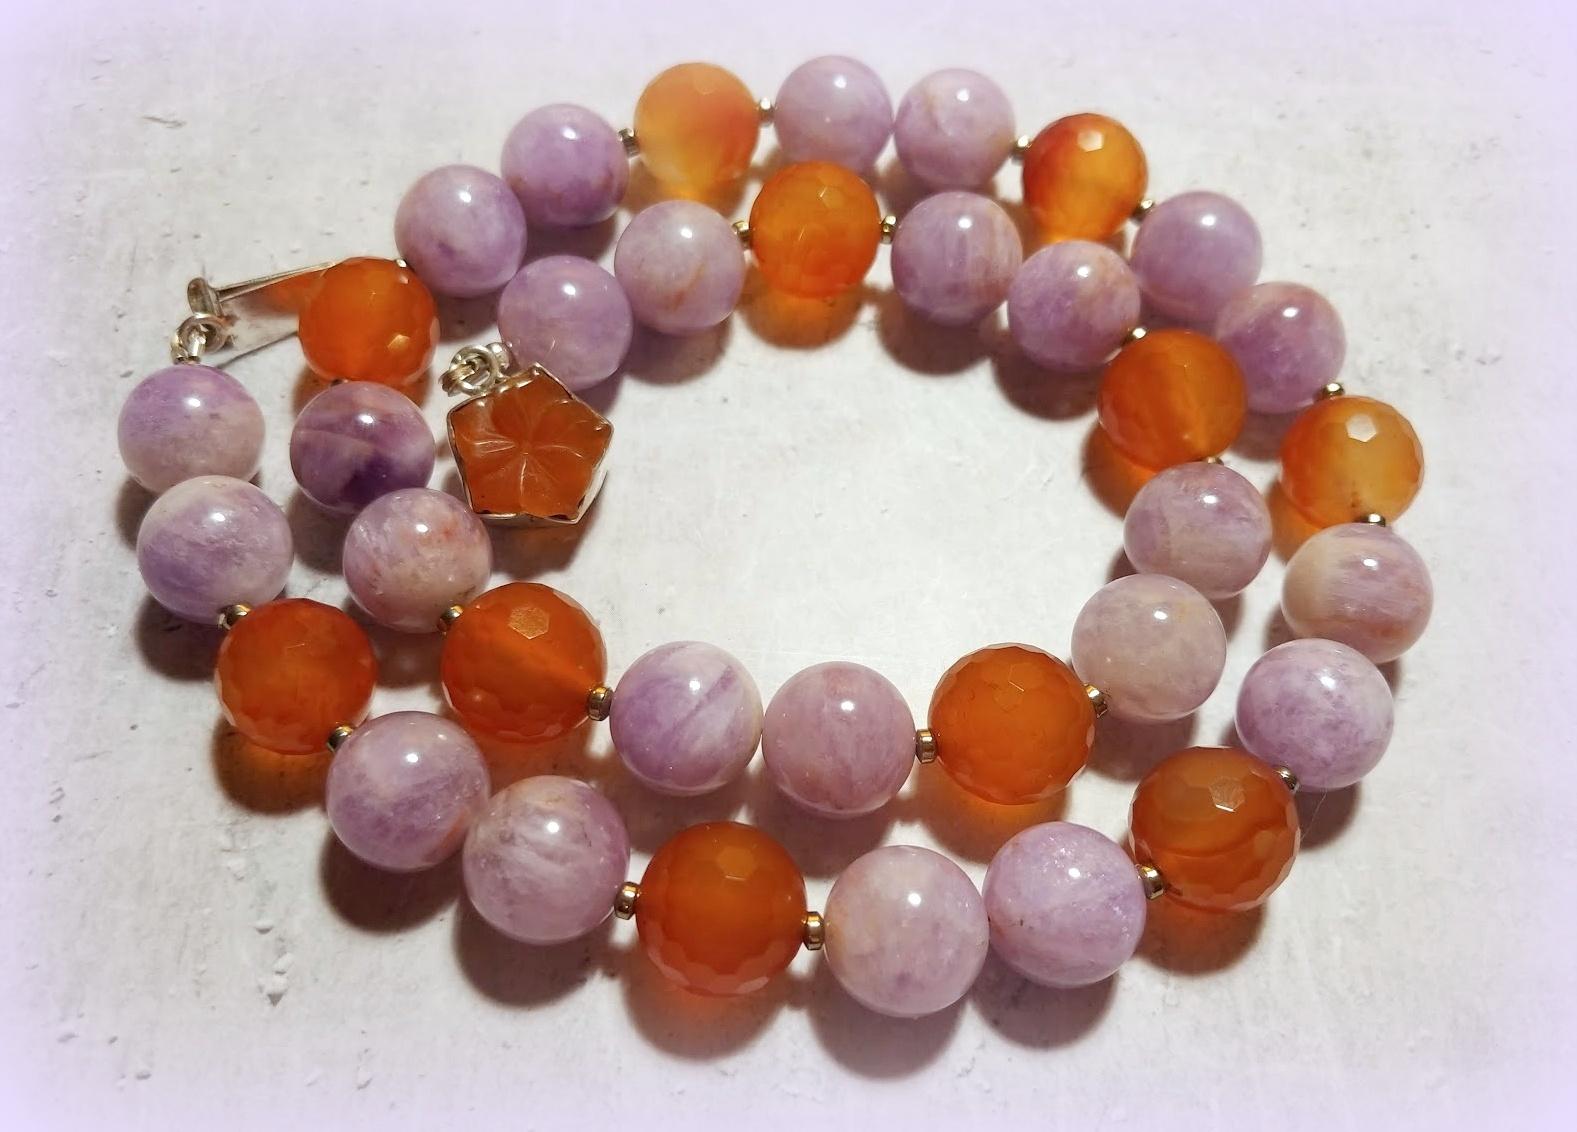 Natural Lavender Jade and Faceted Carnelian Necklace with Lovely Vintage Carnelian Clasp.
Pretty necklace!
The necklace is 22.5 inches (57 cm) long. 
The size of the round lavender jade beads is 14 mm. 
The size of the faceted carnelian beads is